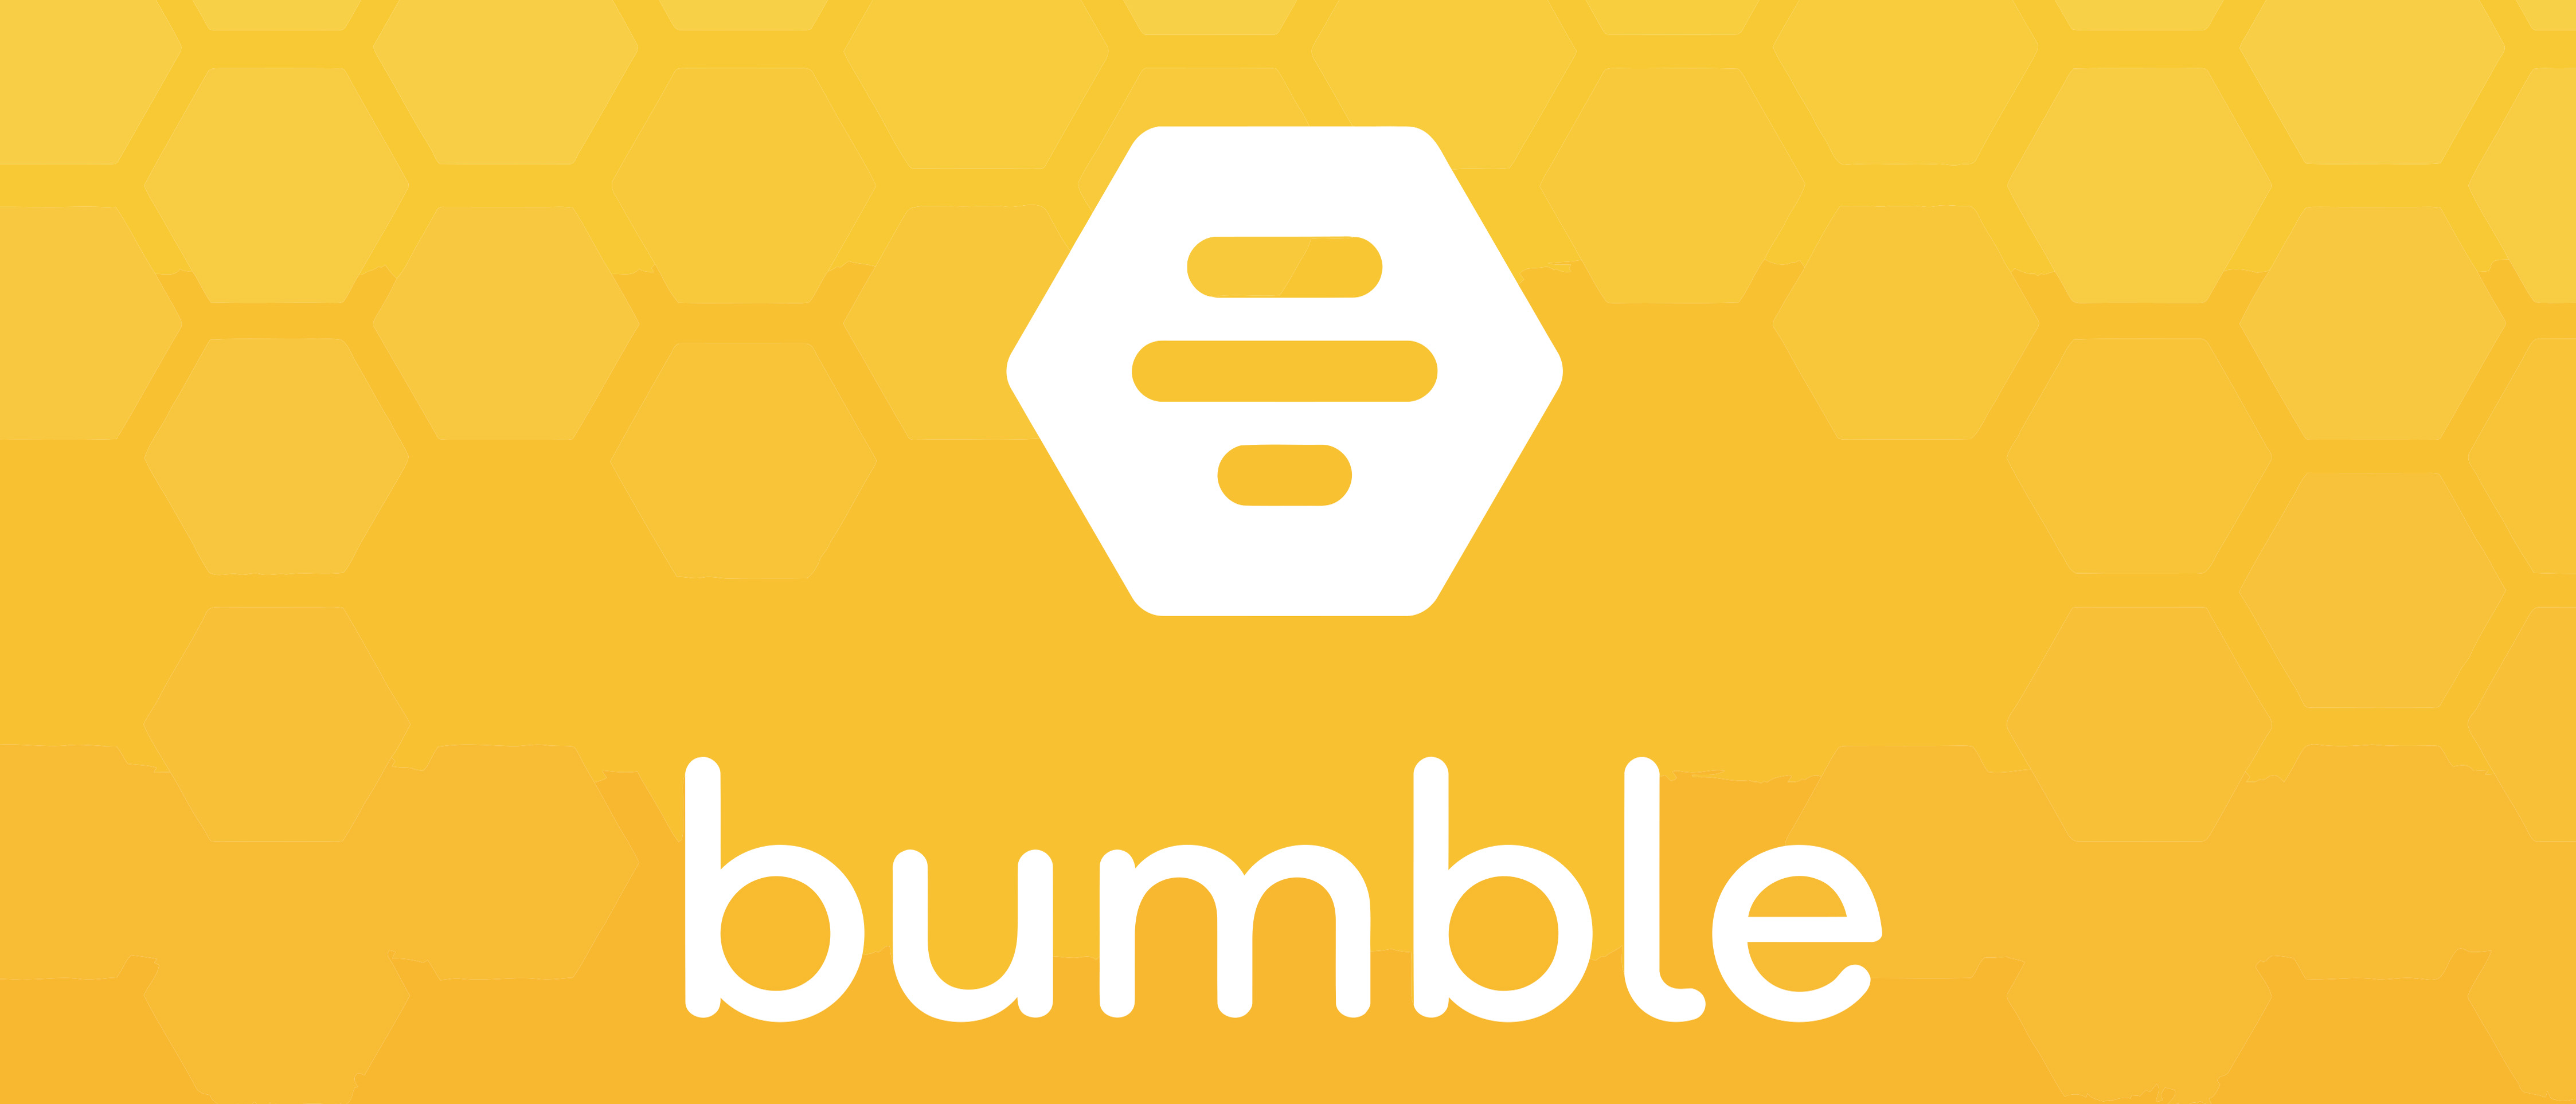 Bumble: Best gay dating app for relationships